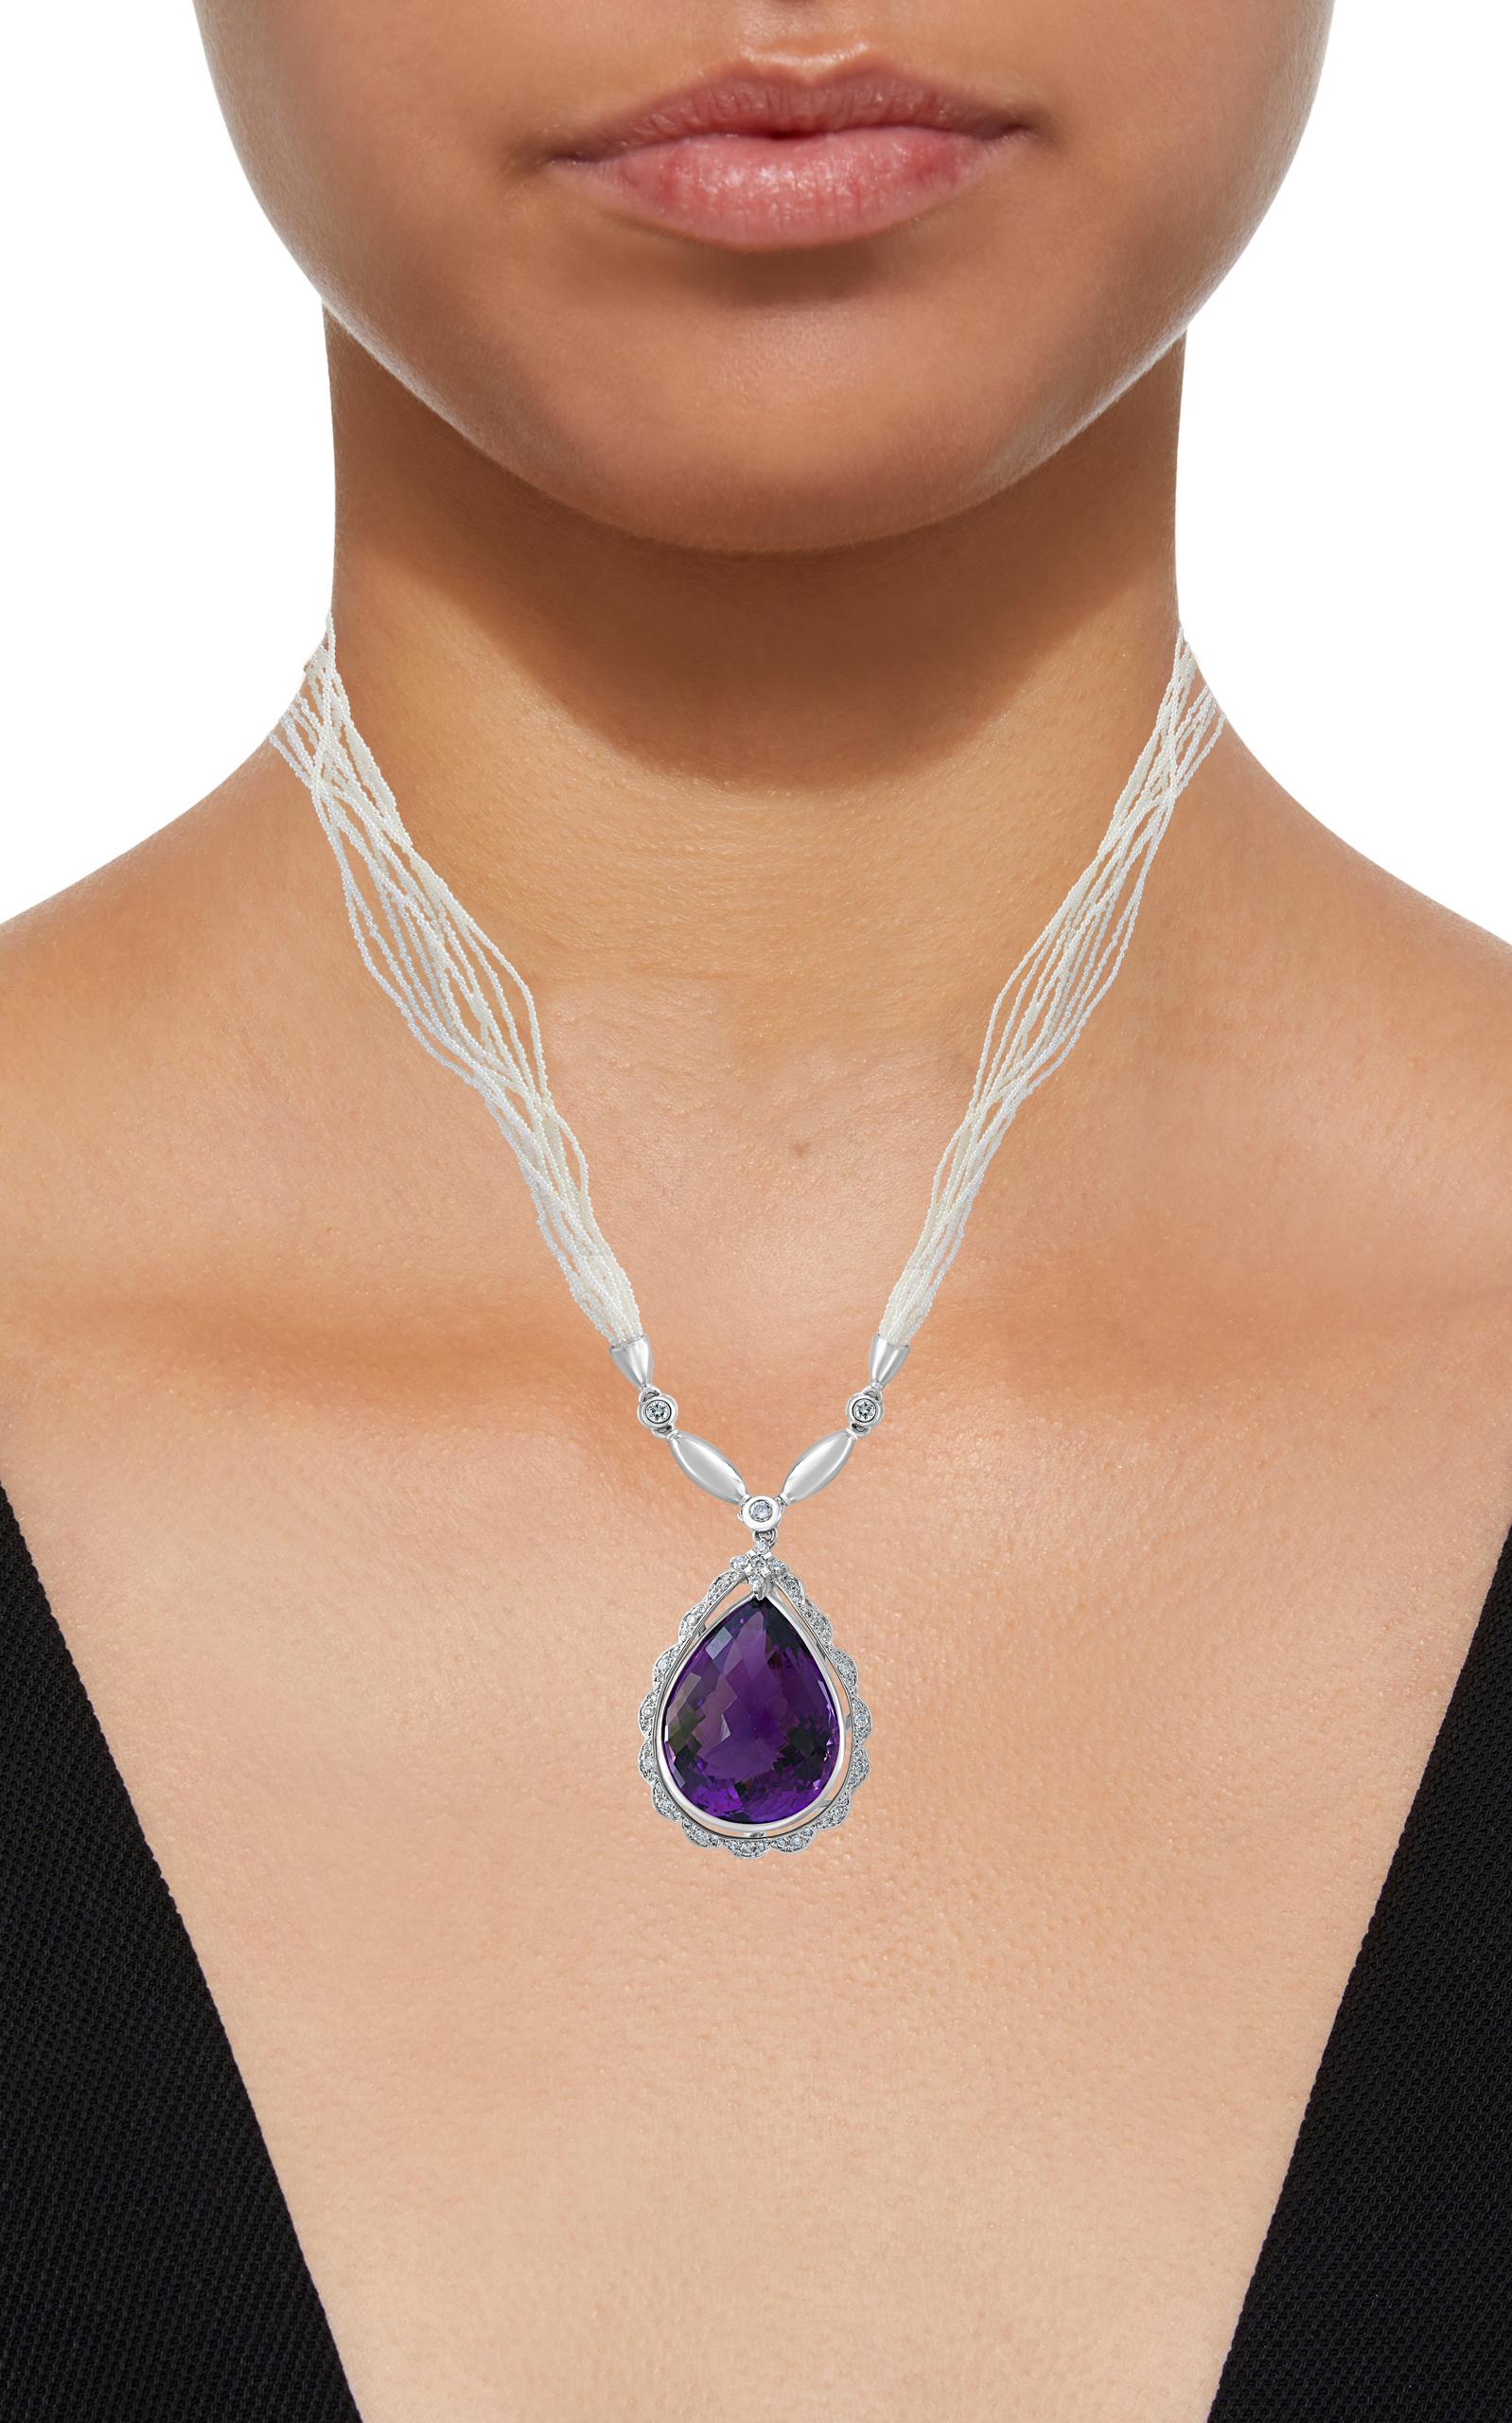 54 Carat Tear Drop Amethyst and Diamonds with Seed Pearl Necklace 18 Karat Gold For Sale 1